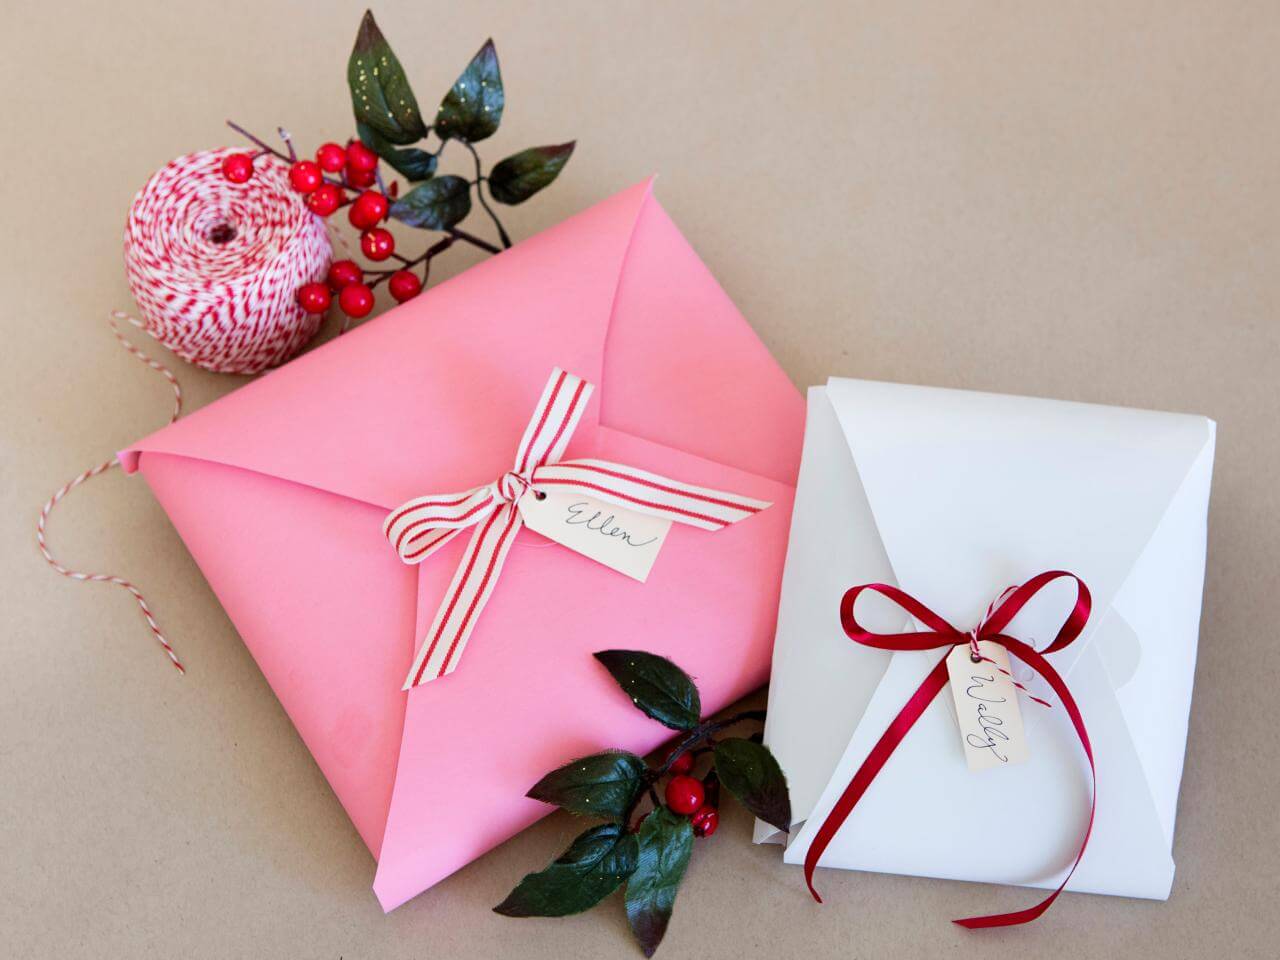 A pink envelope and a white envelope with a red ribbon
